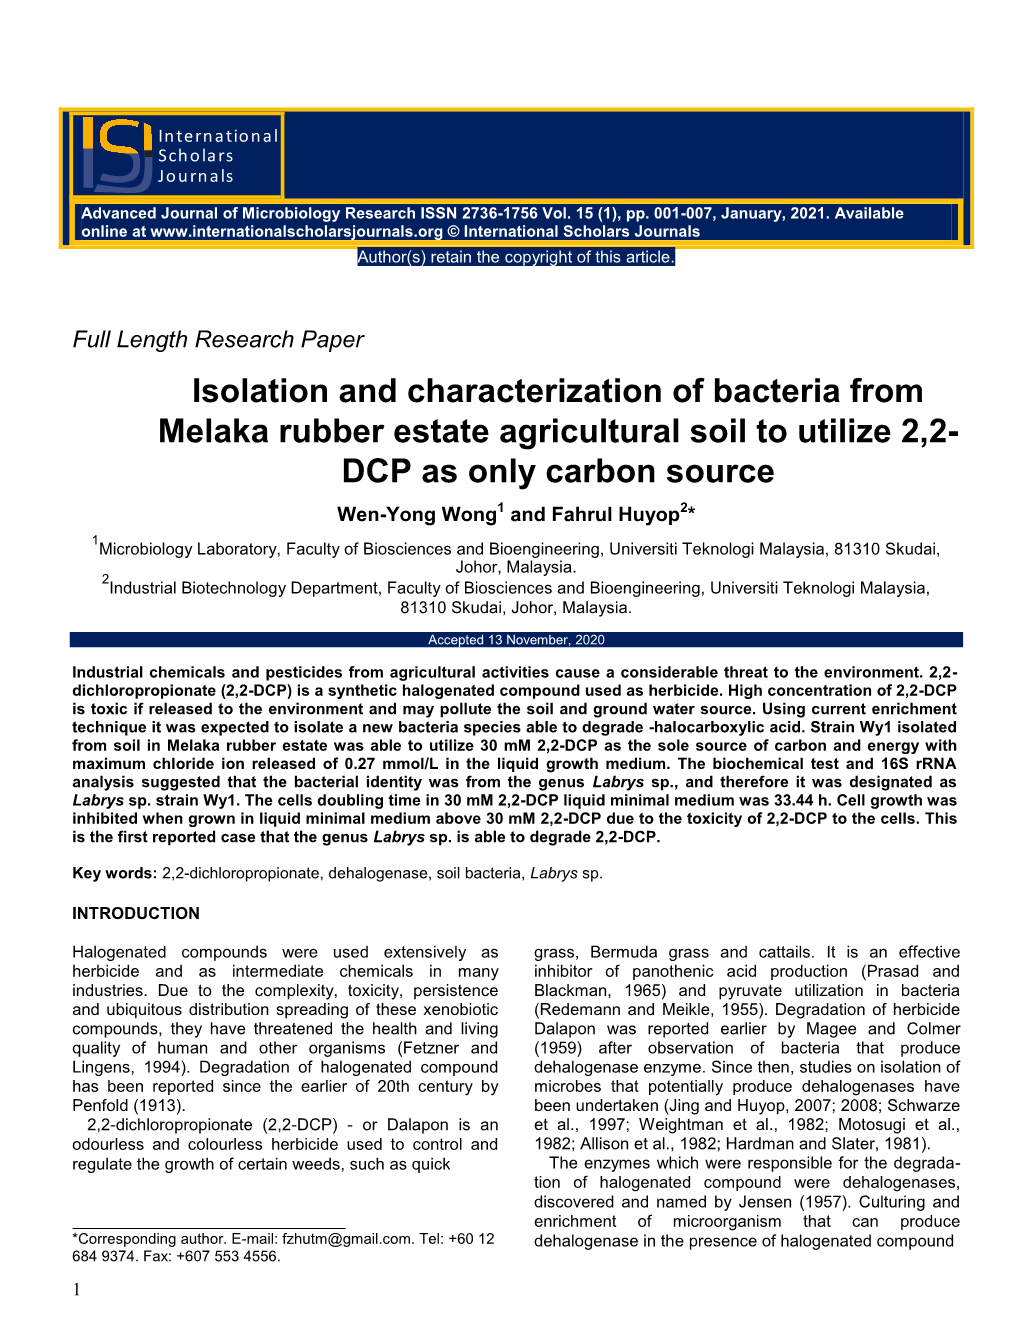 Isolation and Characterization of Bacteria from Melaka Rubber Estate Agricultural Soil to Utilize 2,2- DCP As Only Carbon Source